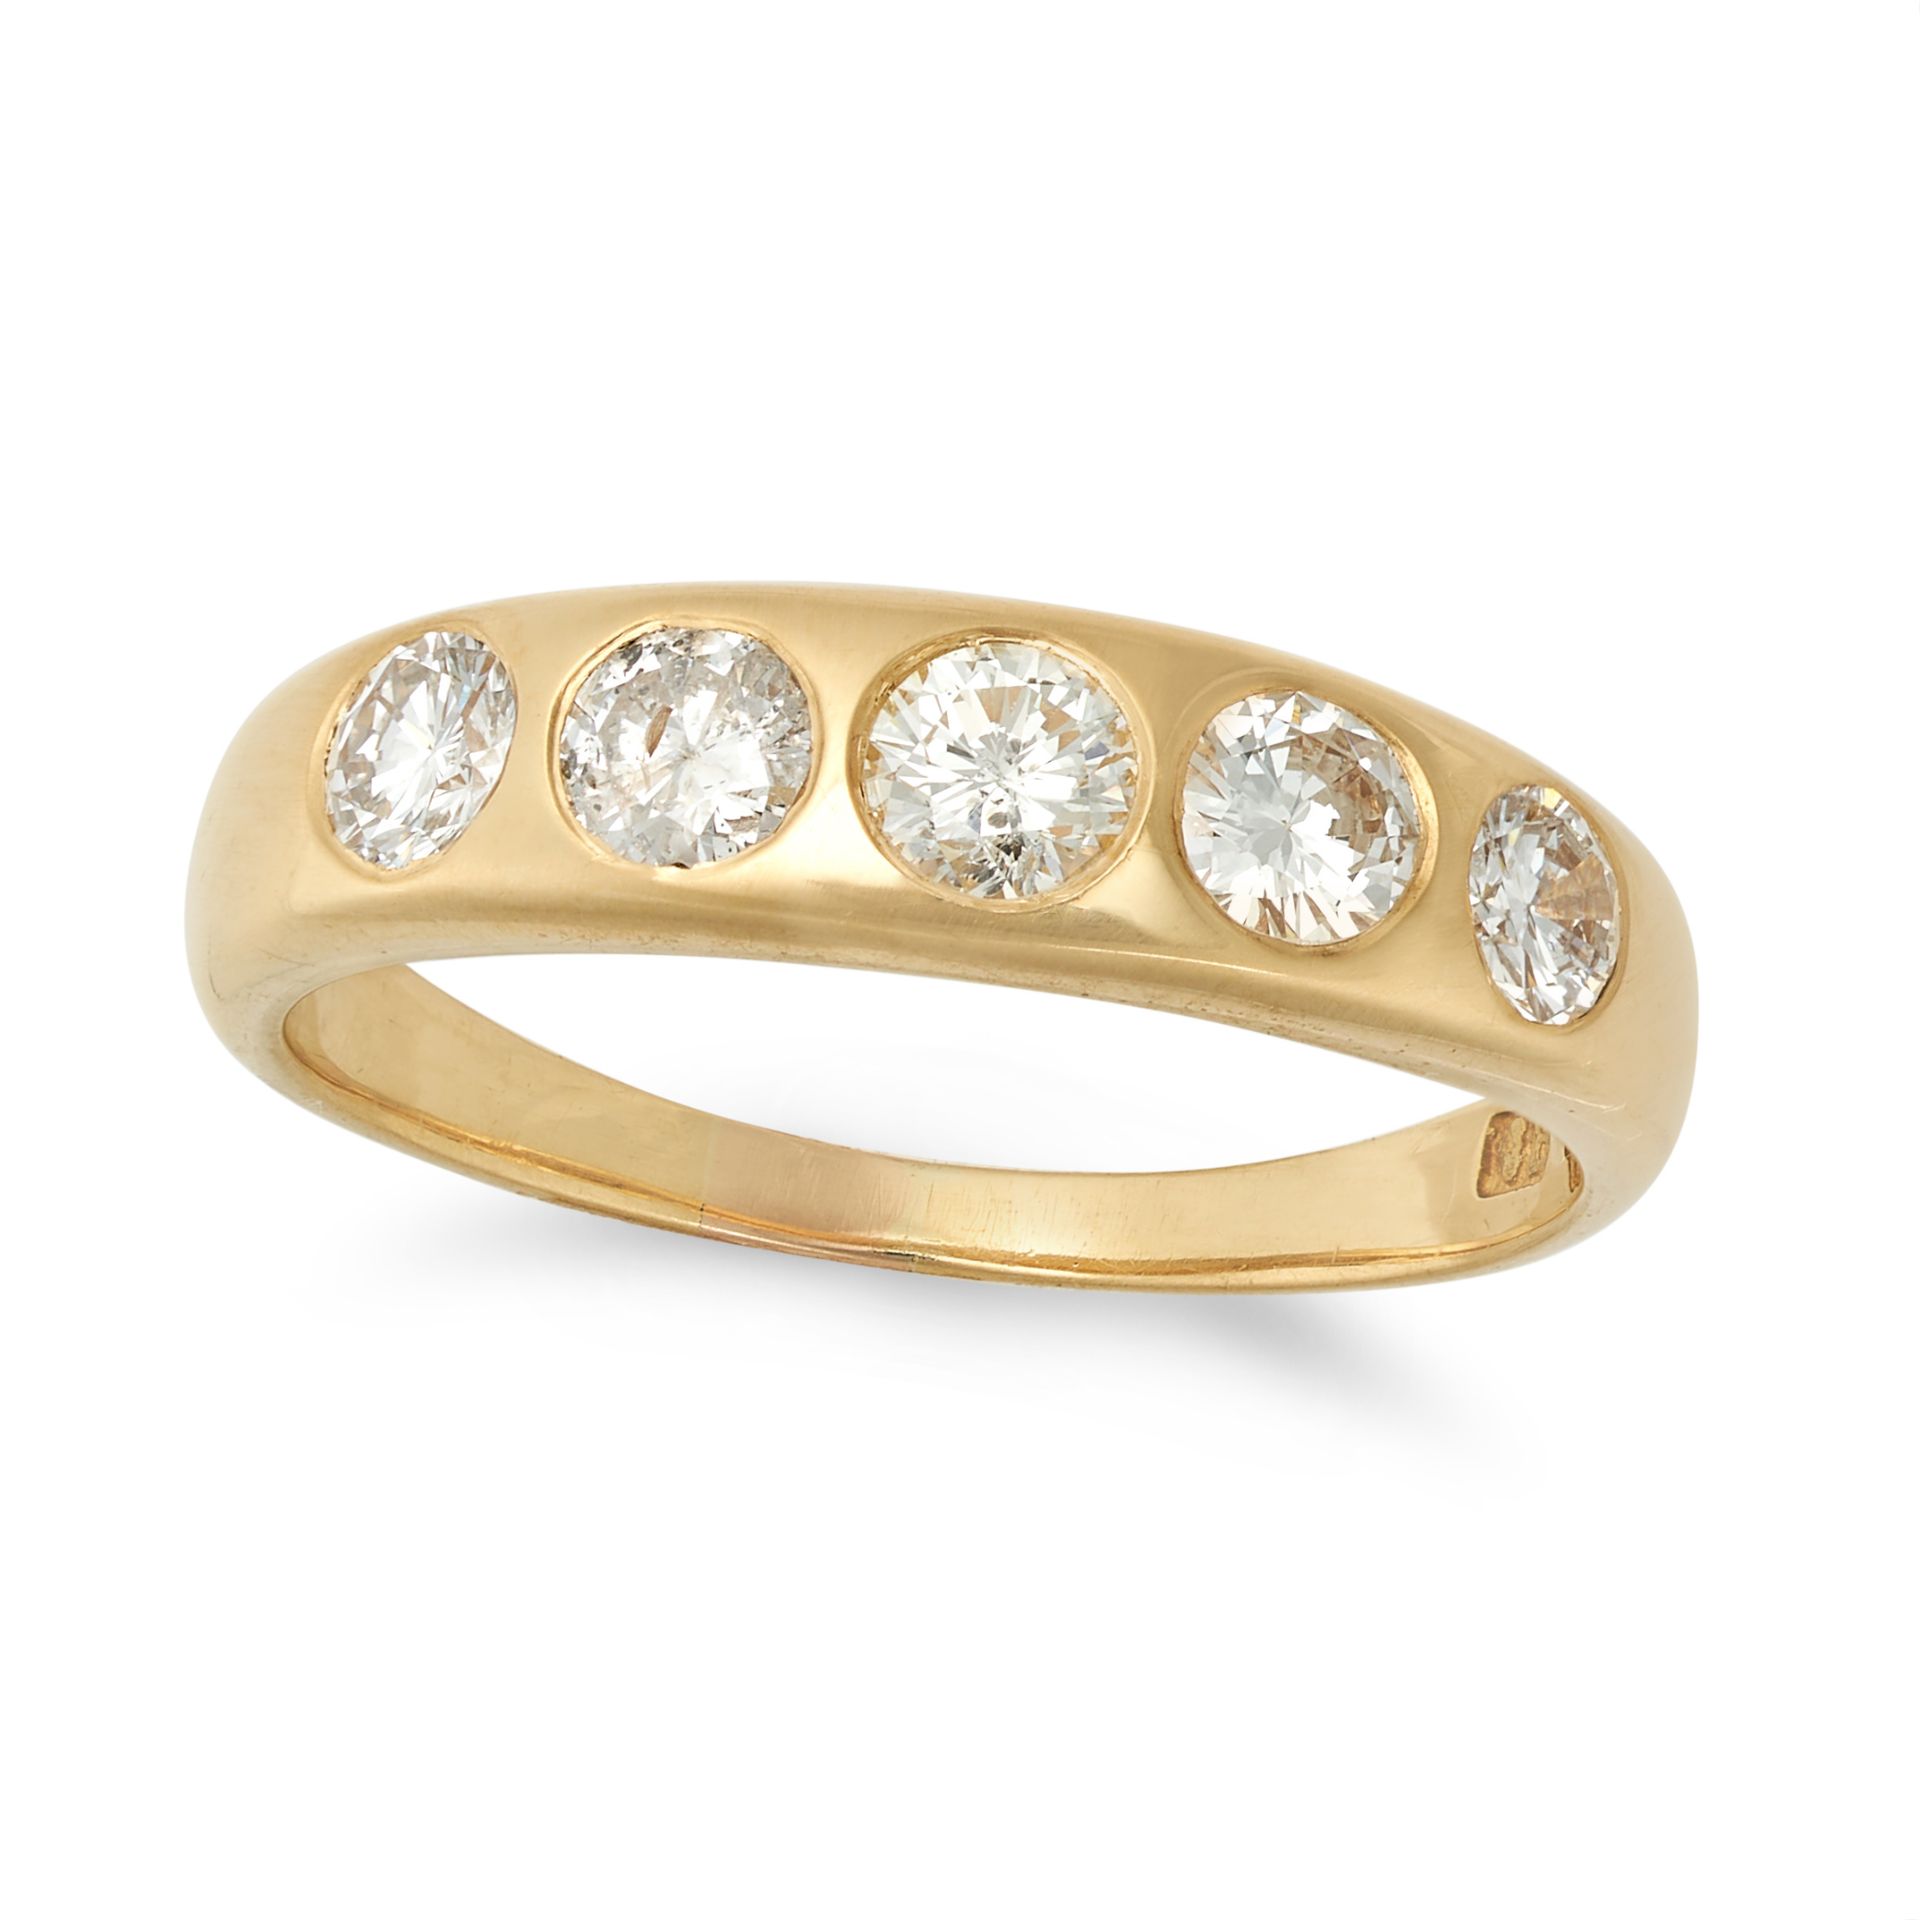 A DIAMOND BAND RING in 18ct yellow gold, set with five round brilliant cut diamonds all totalling...